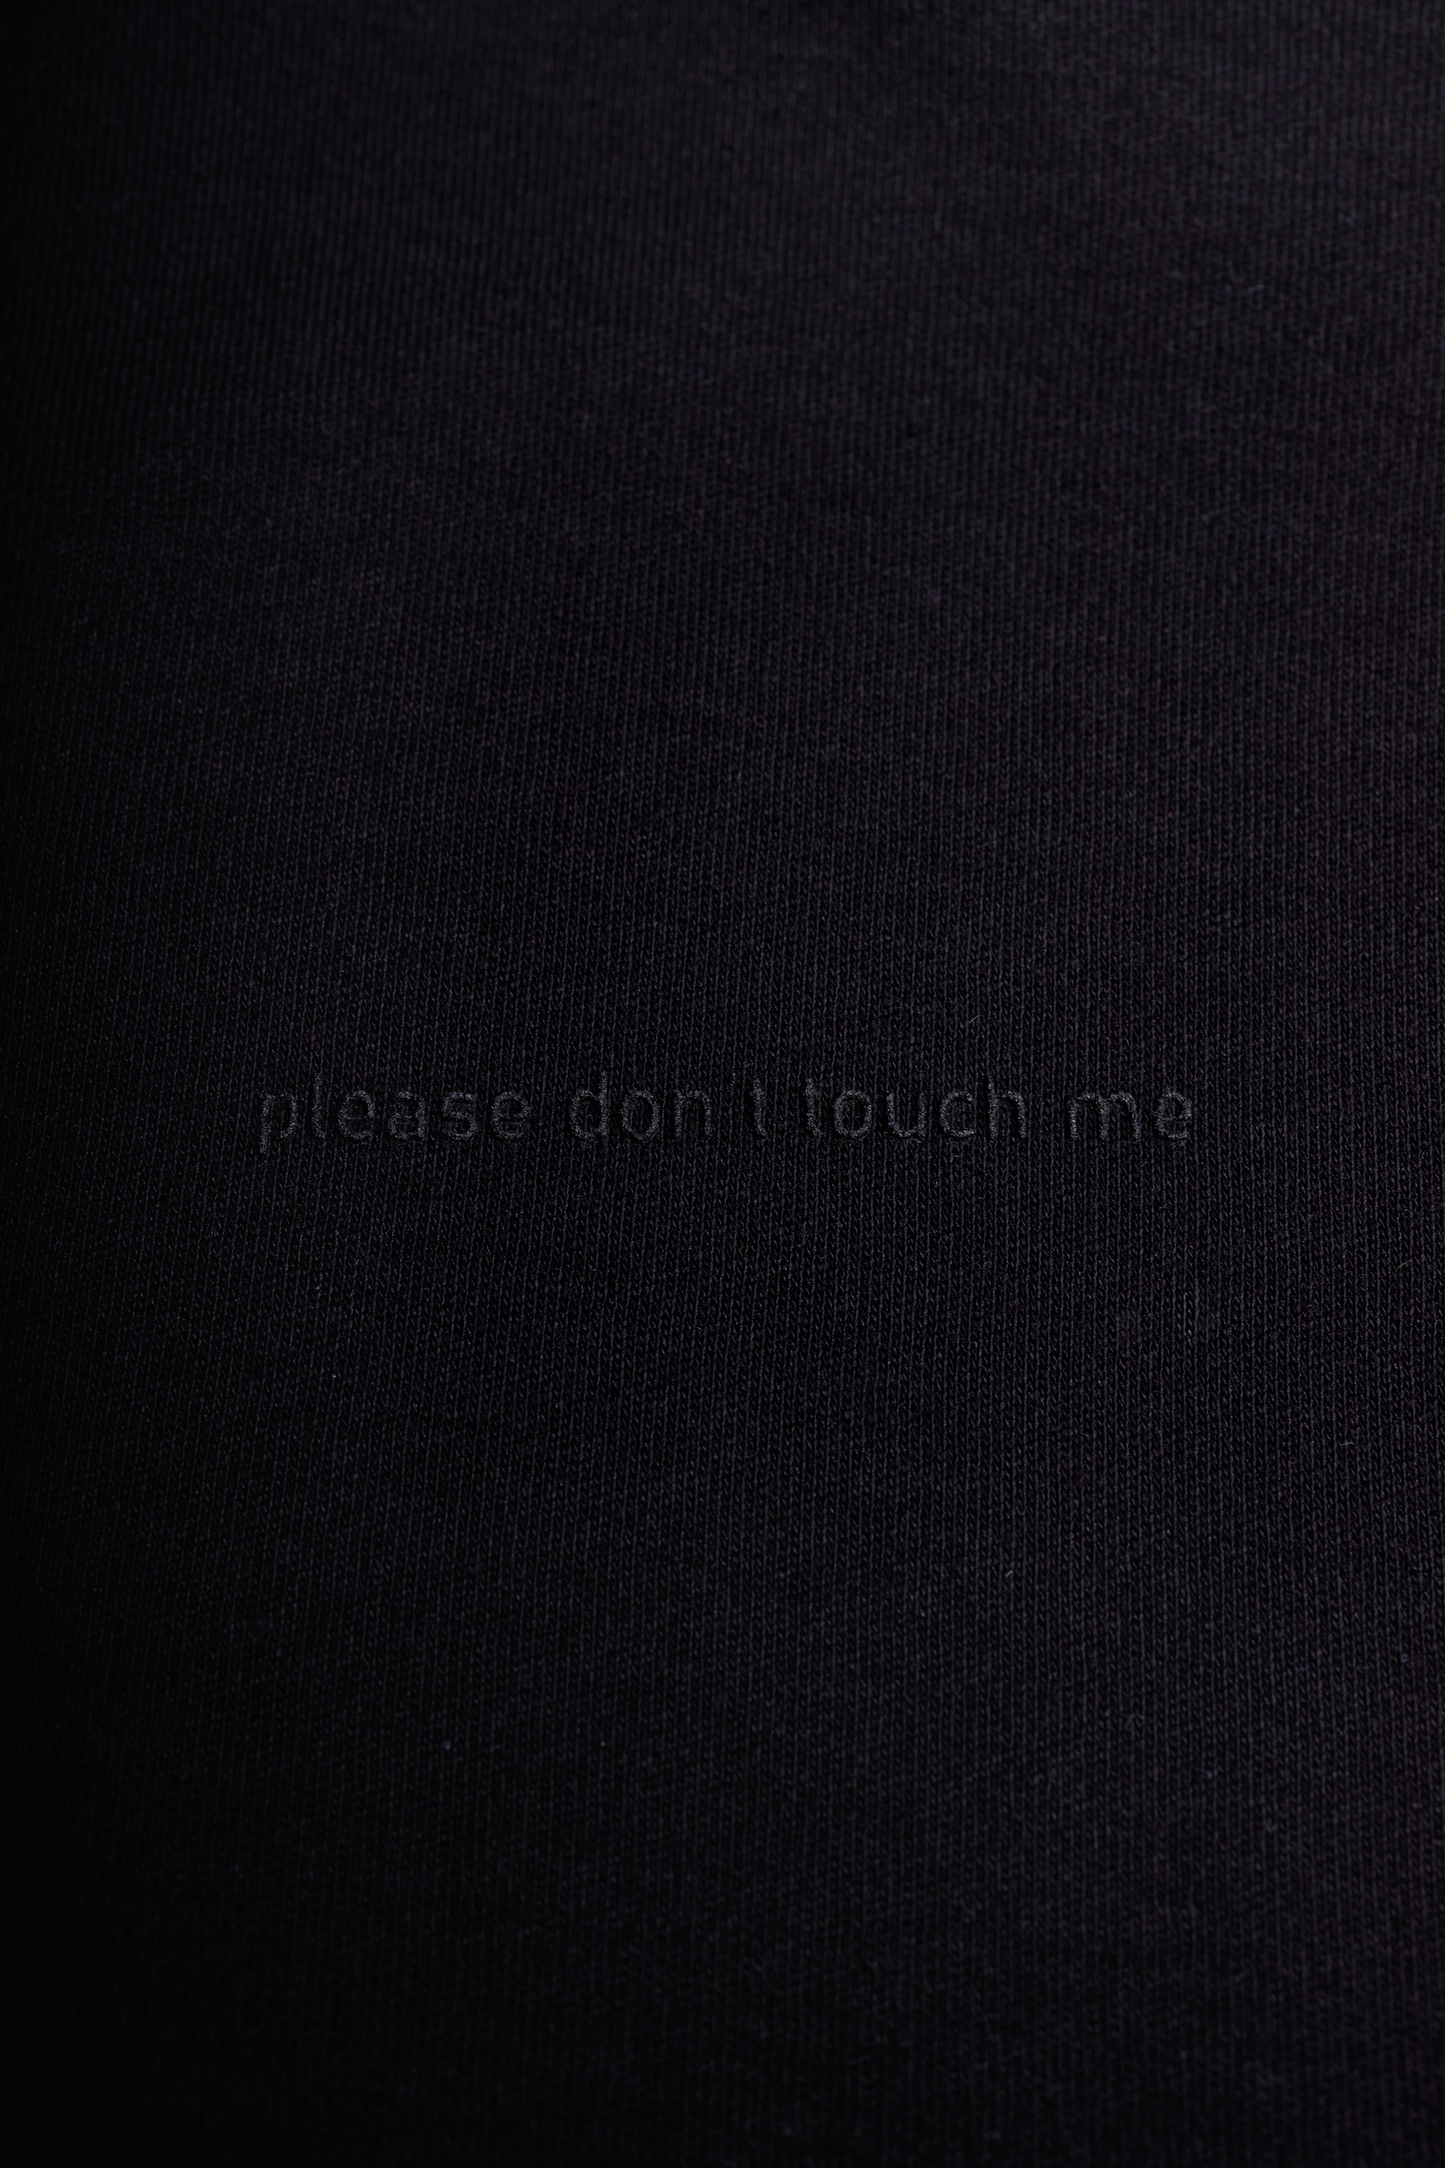 "Please Don't Touch Me" Tee 😤